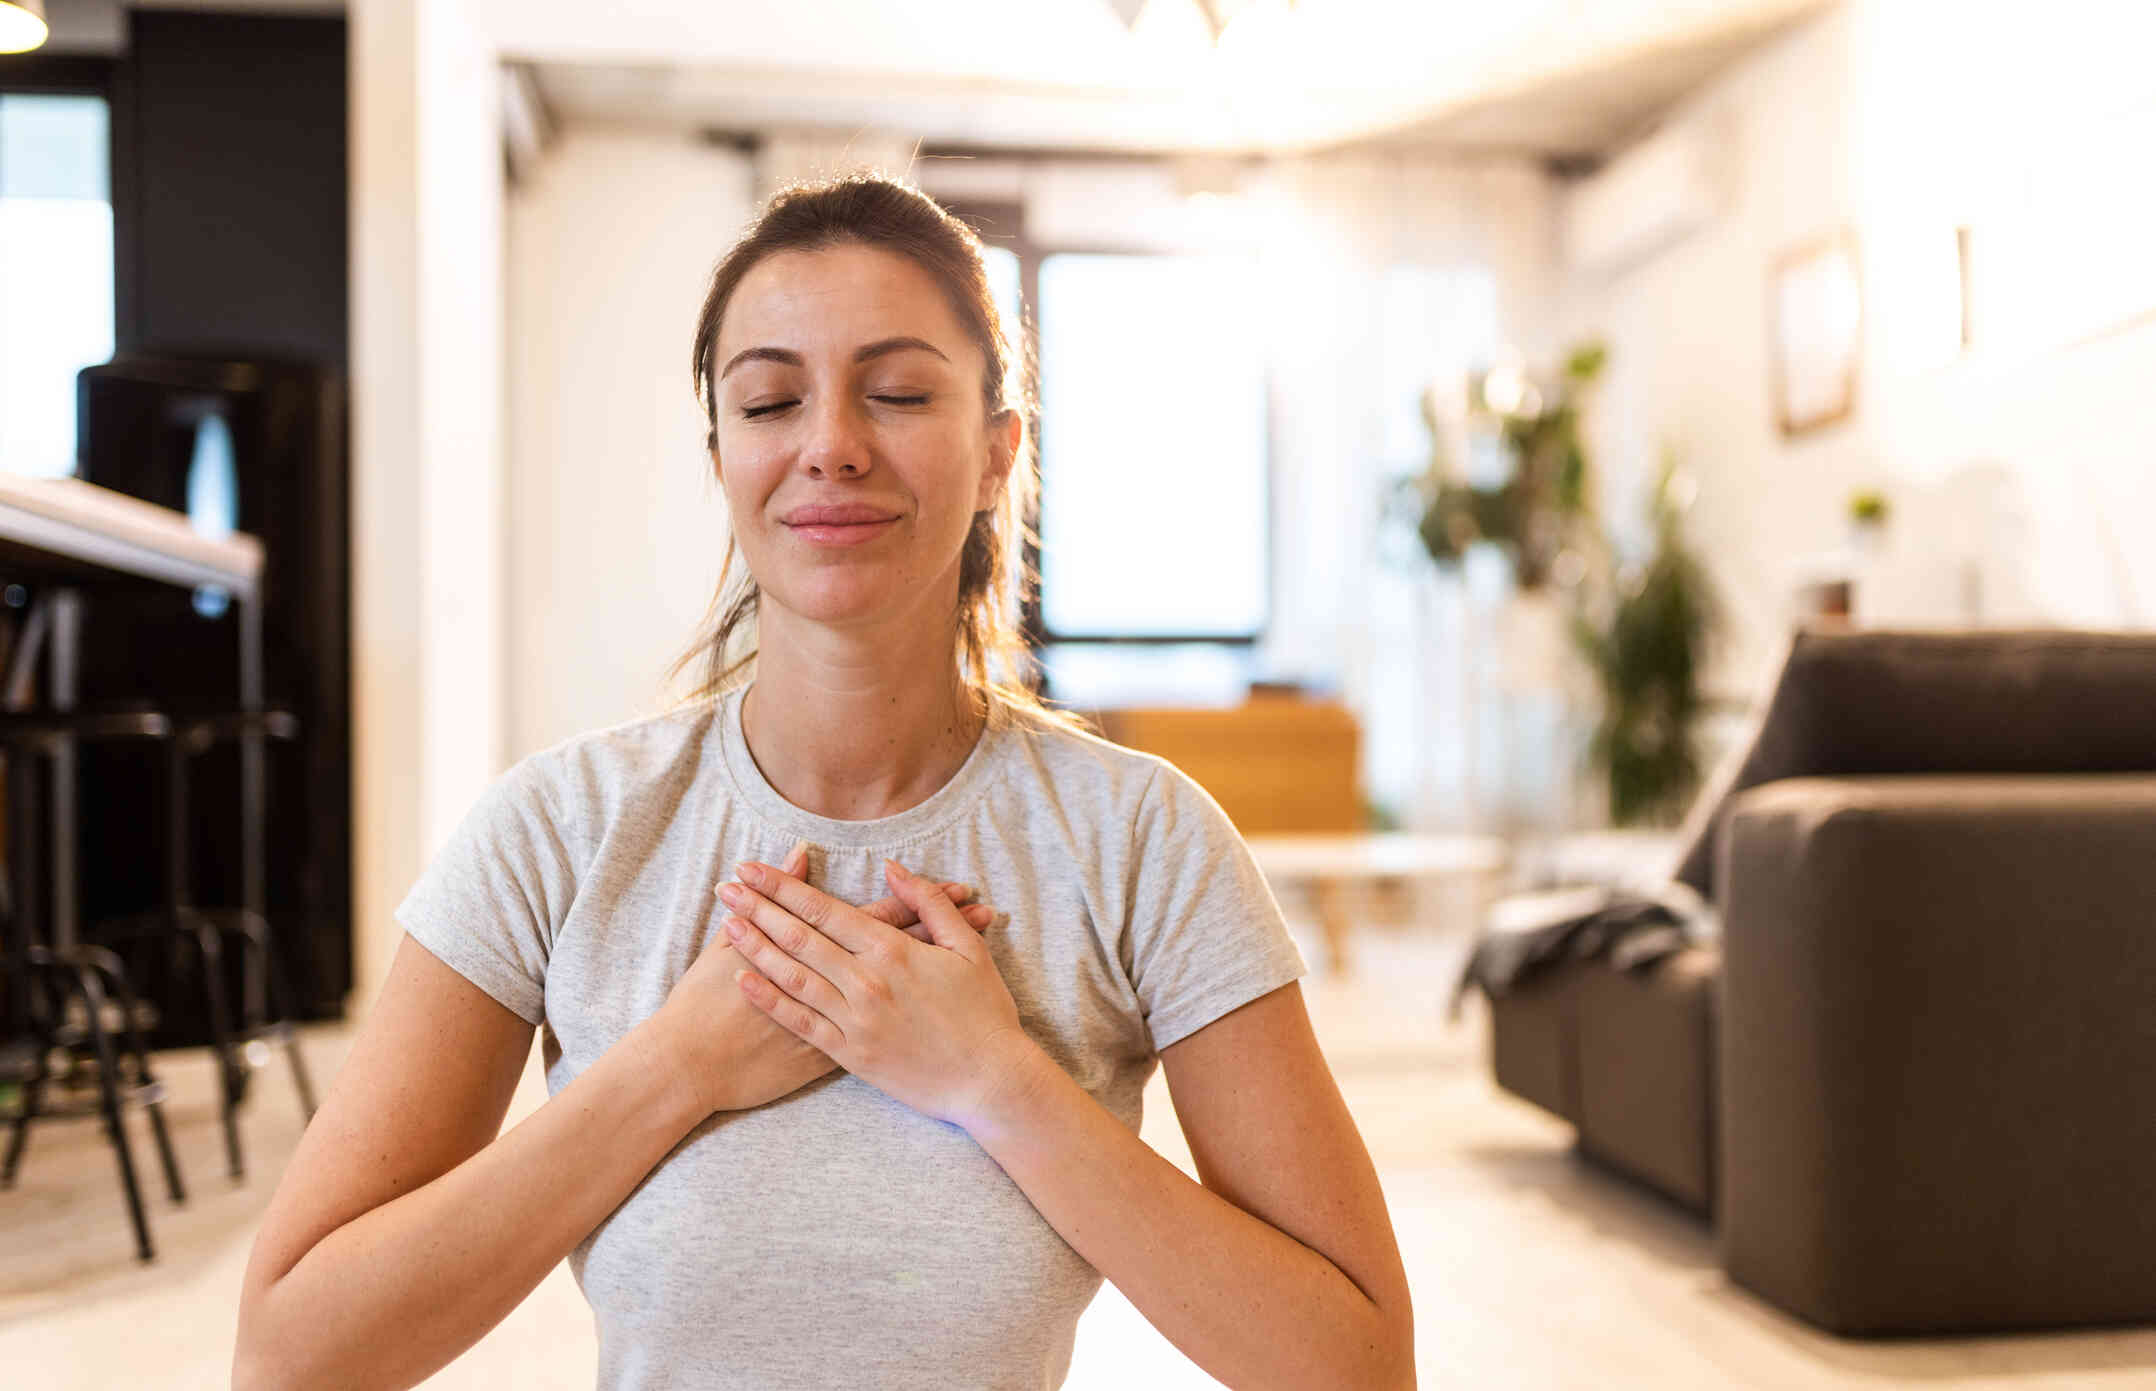 A woman in a white shirt sits in her home and places her hands over her heart with her eyes closed while practicing mindfulness.